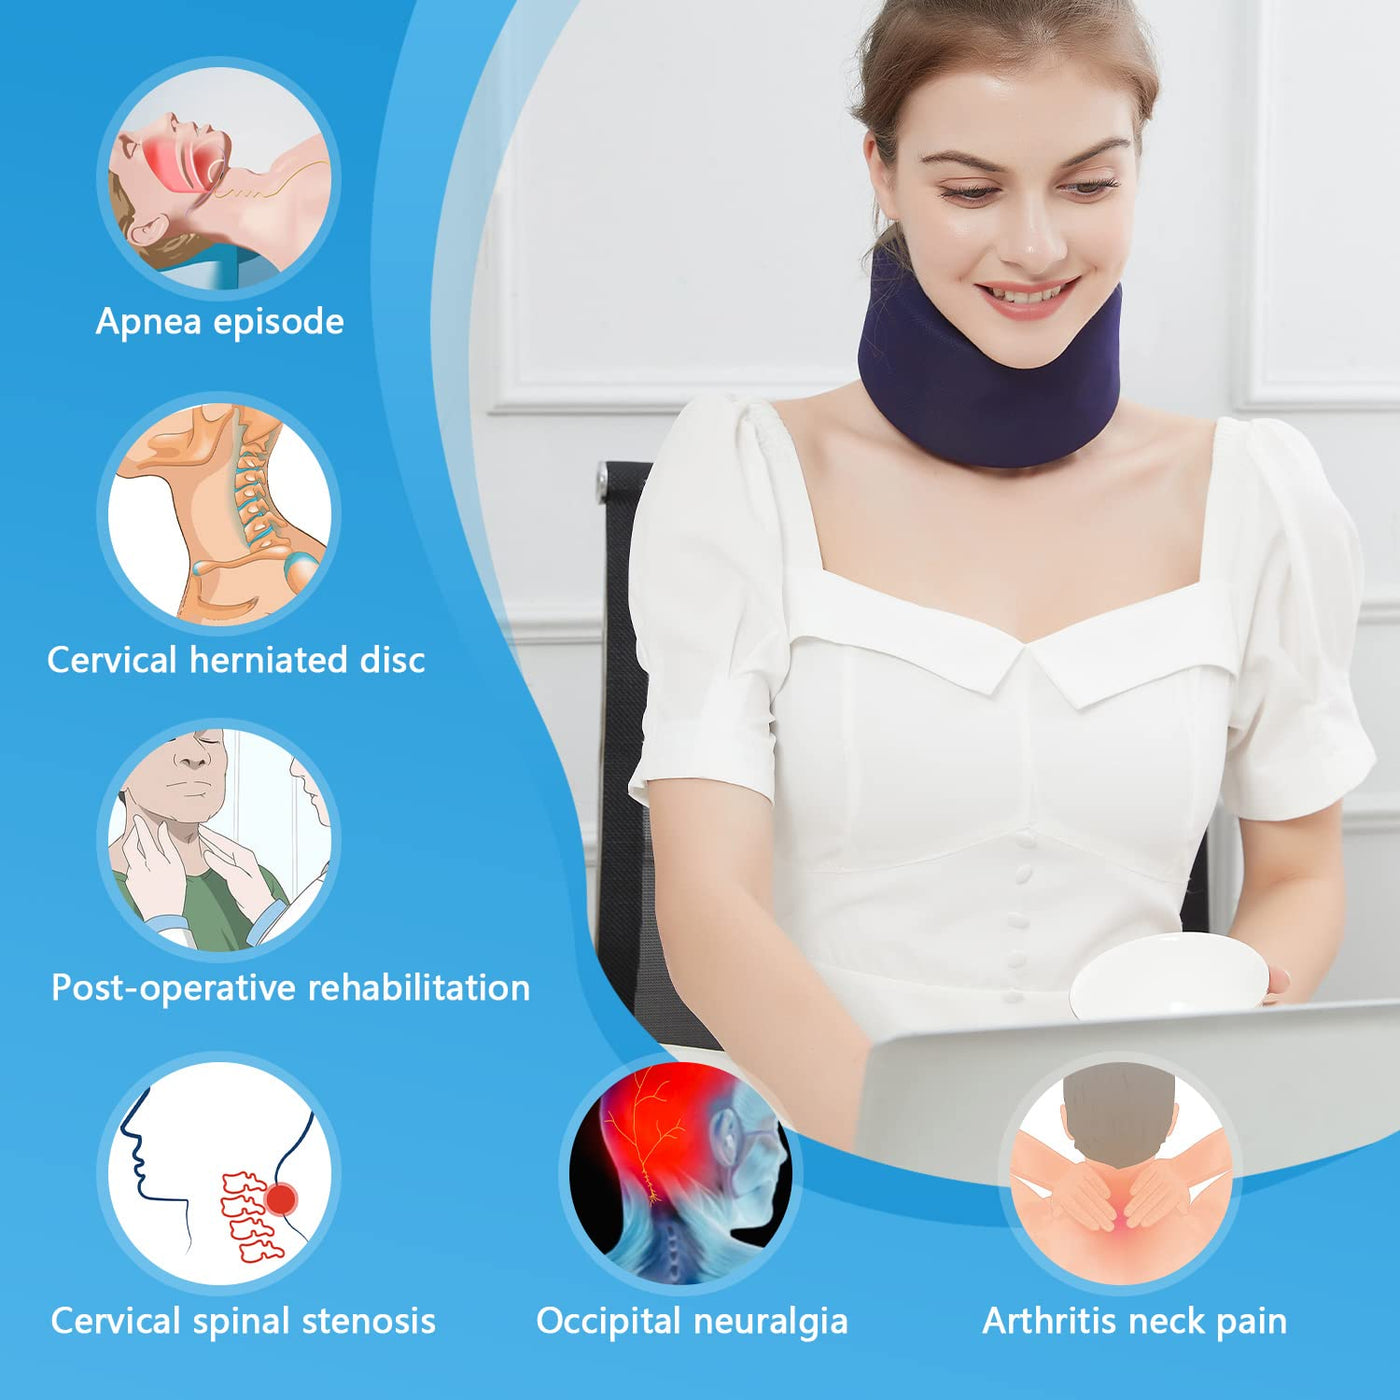 joingood Neck Brace for Neck Pain and Support, Soft Foam Cervical Collar,  Adjustable Neck Support for Sleeping, Wraps Aligns Stabilizes Spine, Neck  Pressure Relief for Women and Men, Blue, 4IN - Coupon